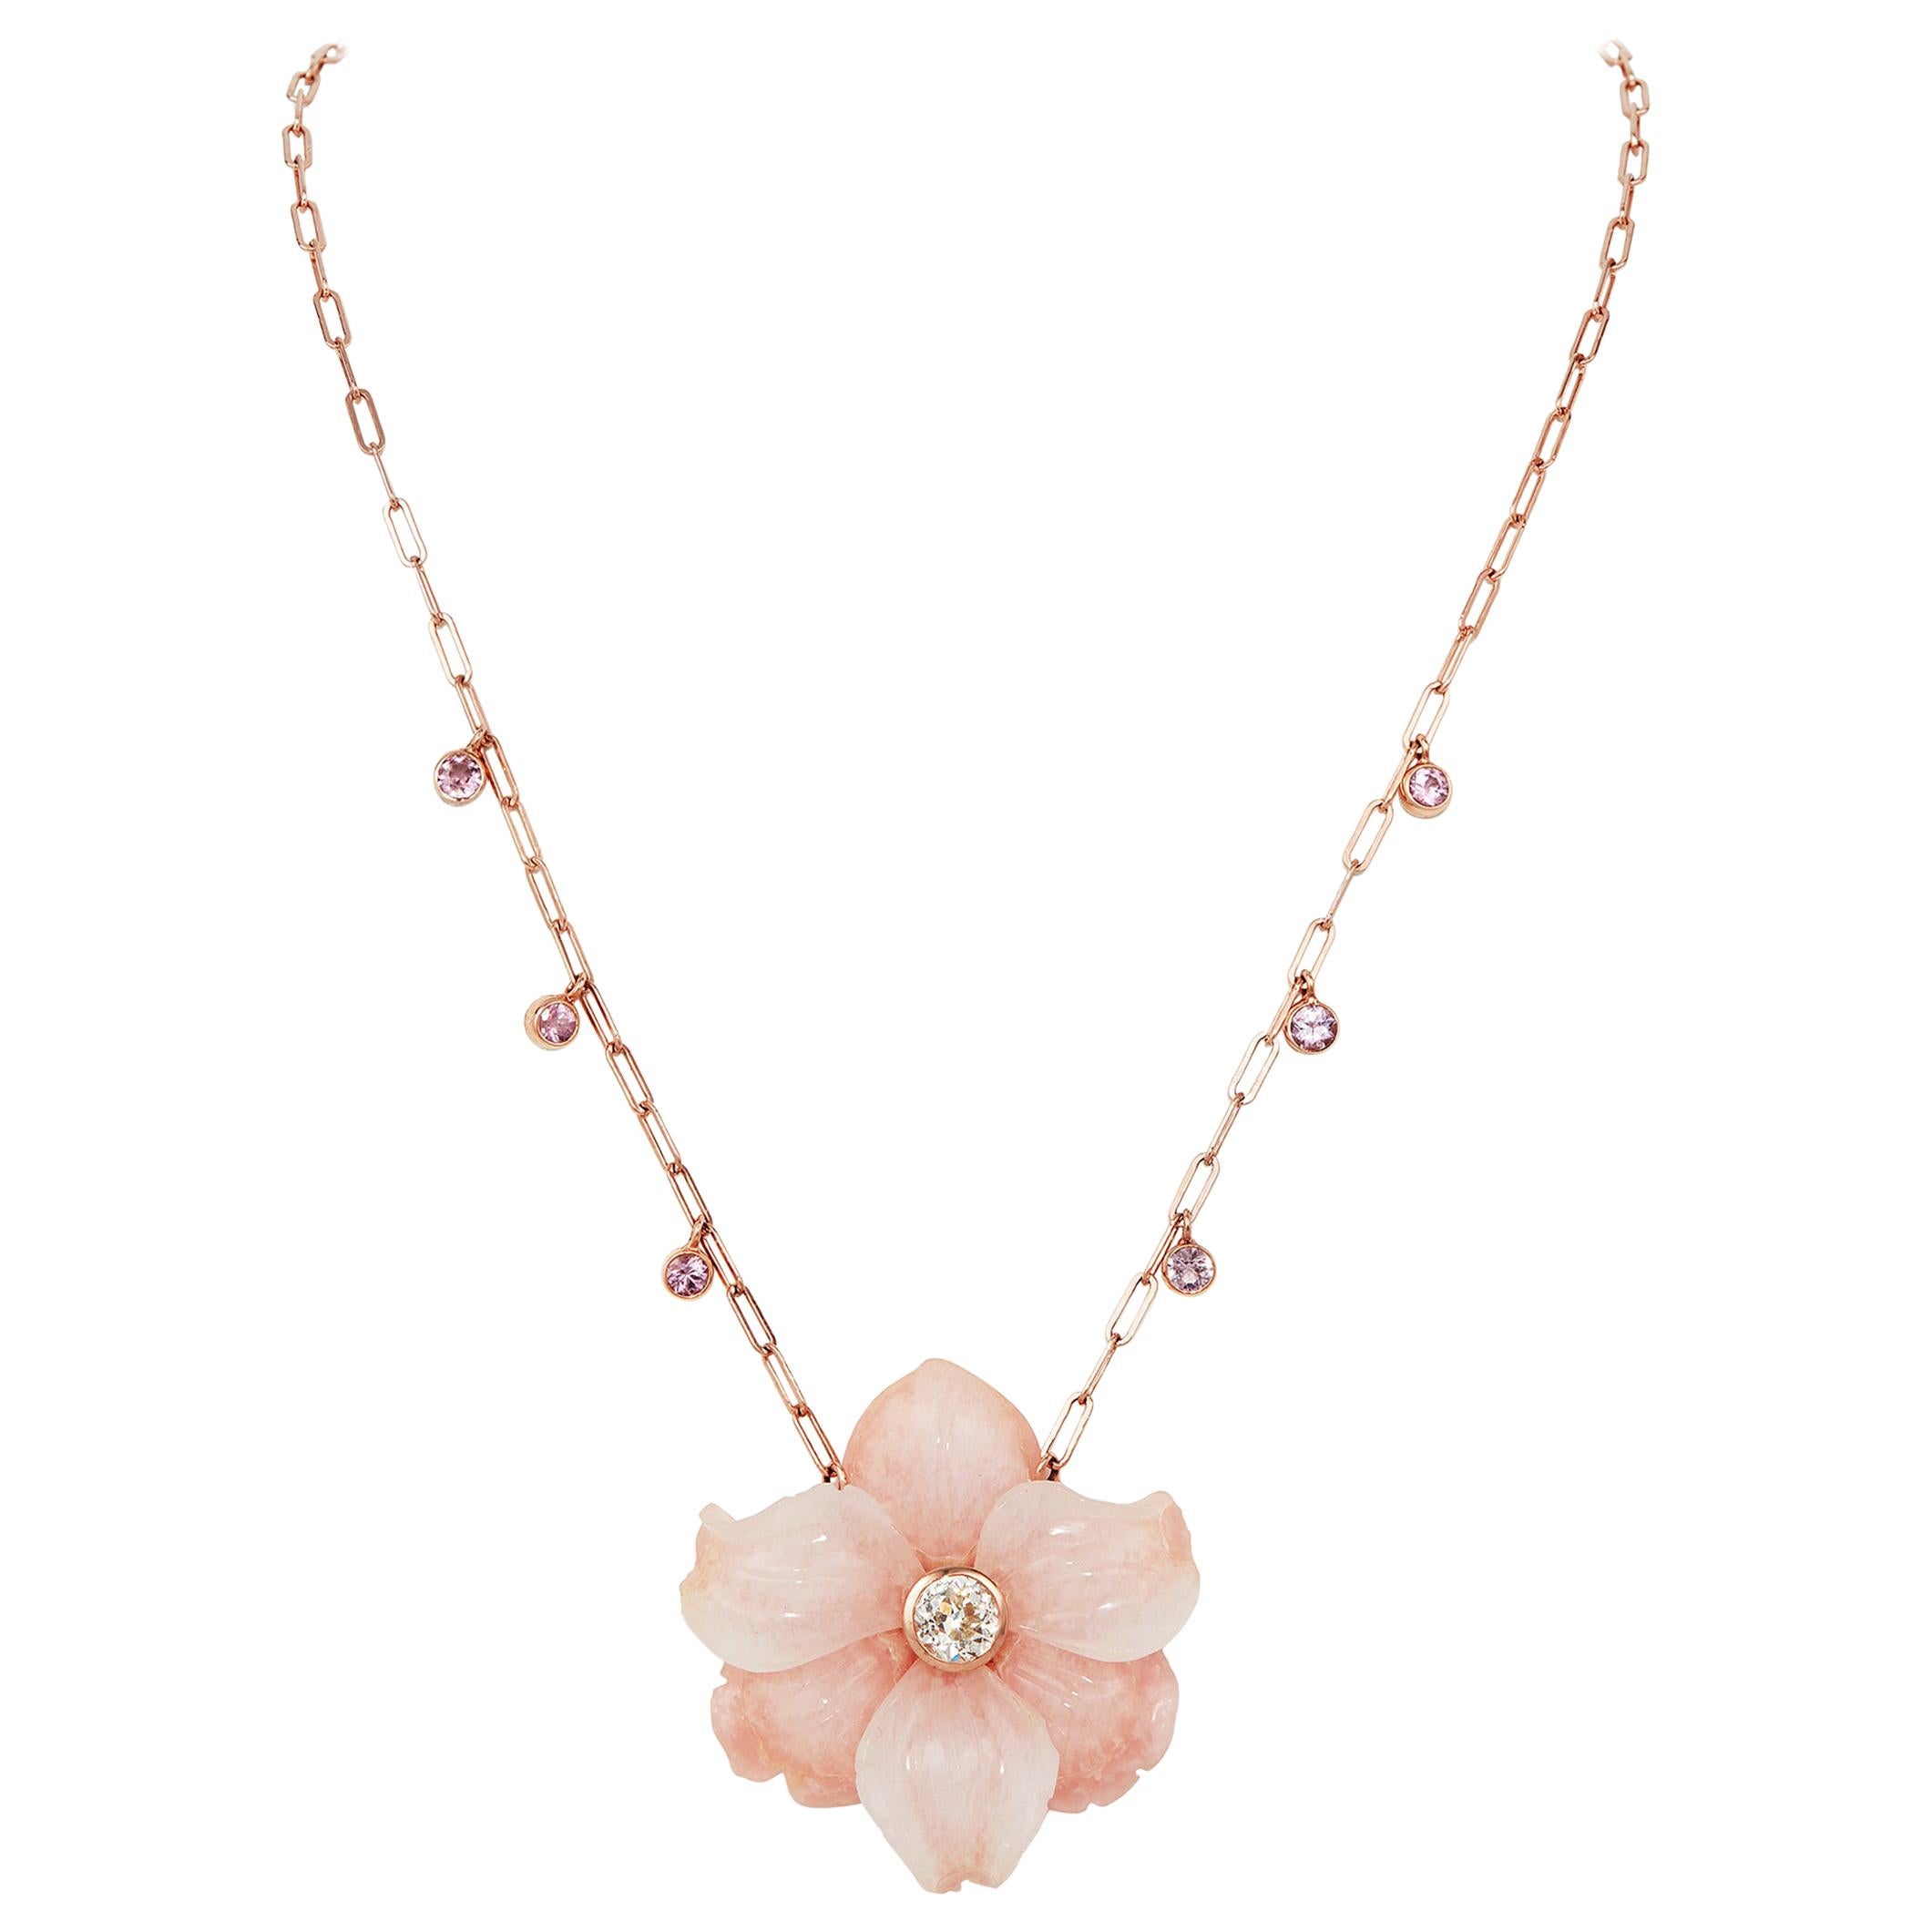 0.855 Carat Round Diamond, Carved Pink Calcite Flower Necklace with Pink Spinel  For Sale